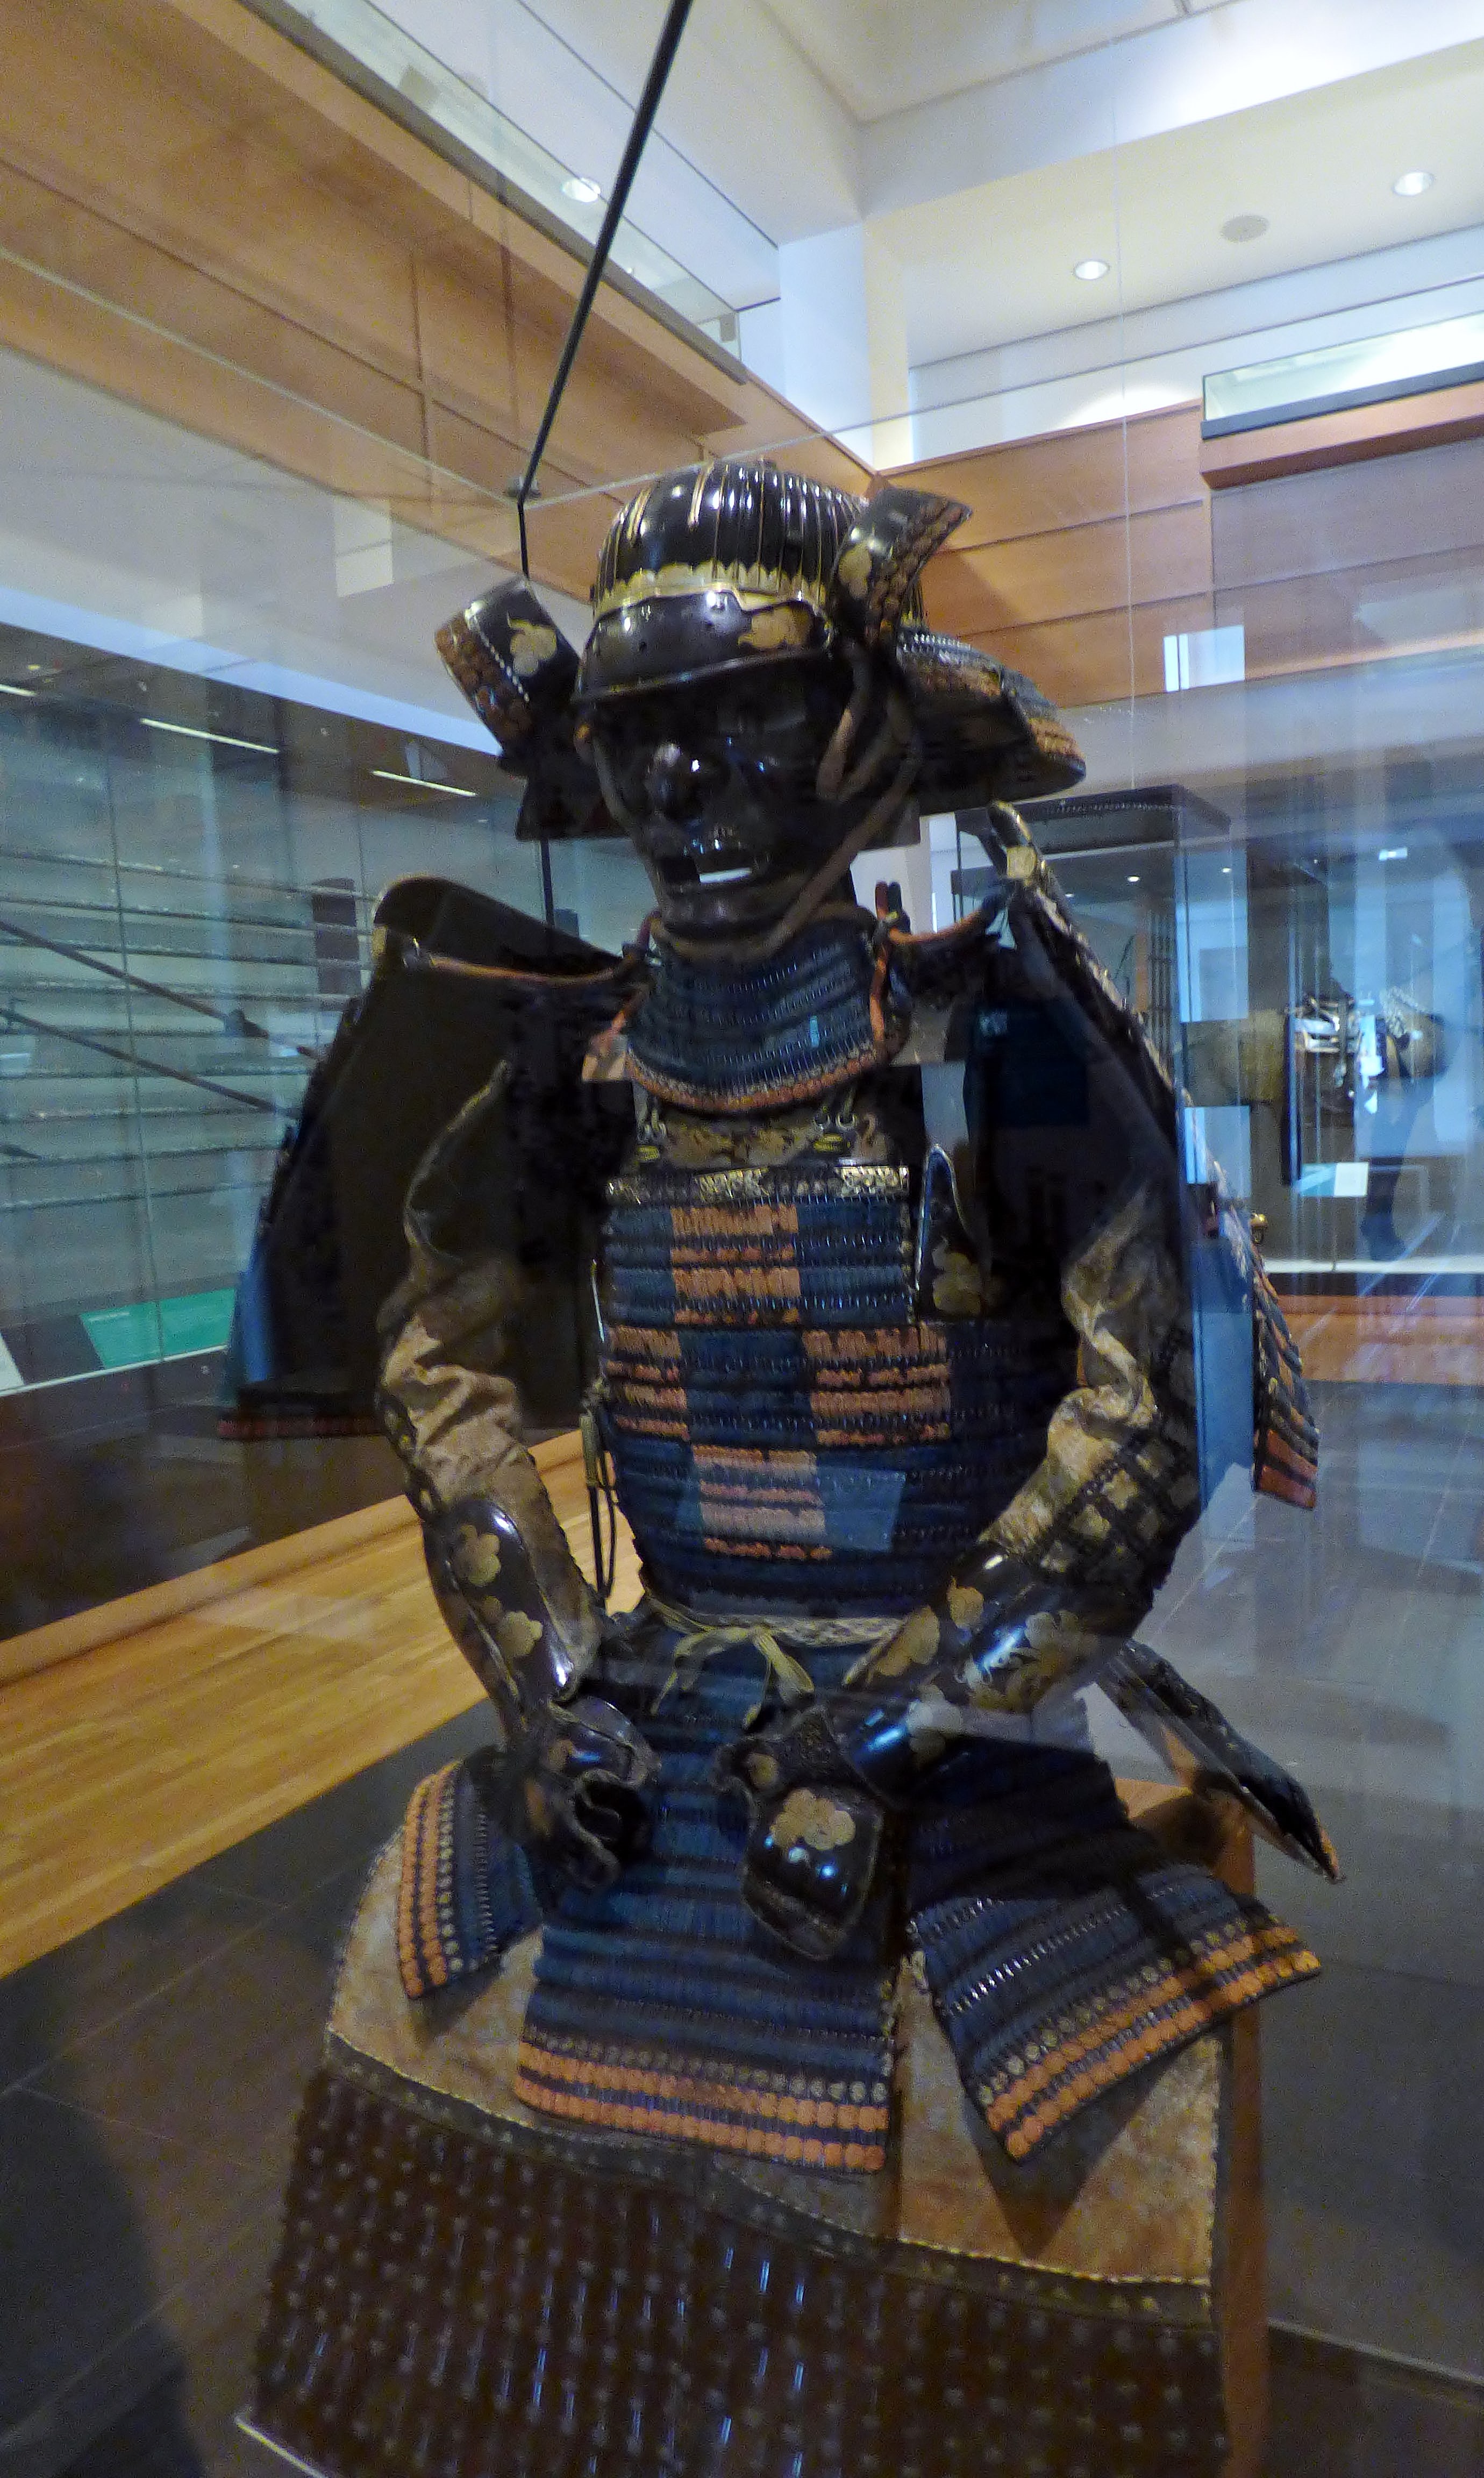 JAPANESE ARMOUR, a gift to King James I on the occasion of the signing of trading rights between Japan and England 1613 Royal Armouries Museum, Leeds